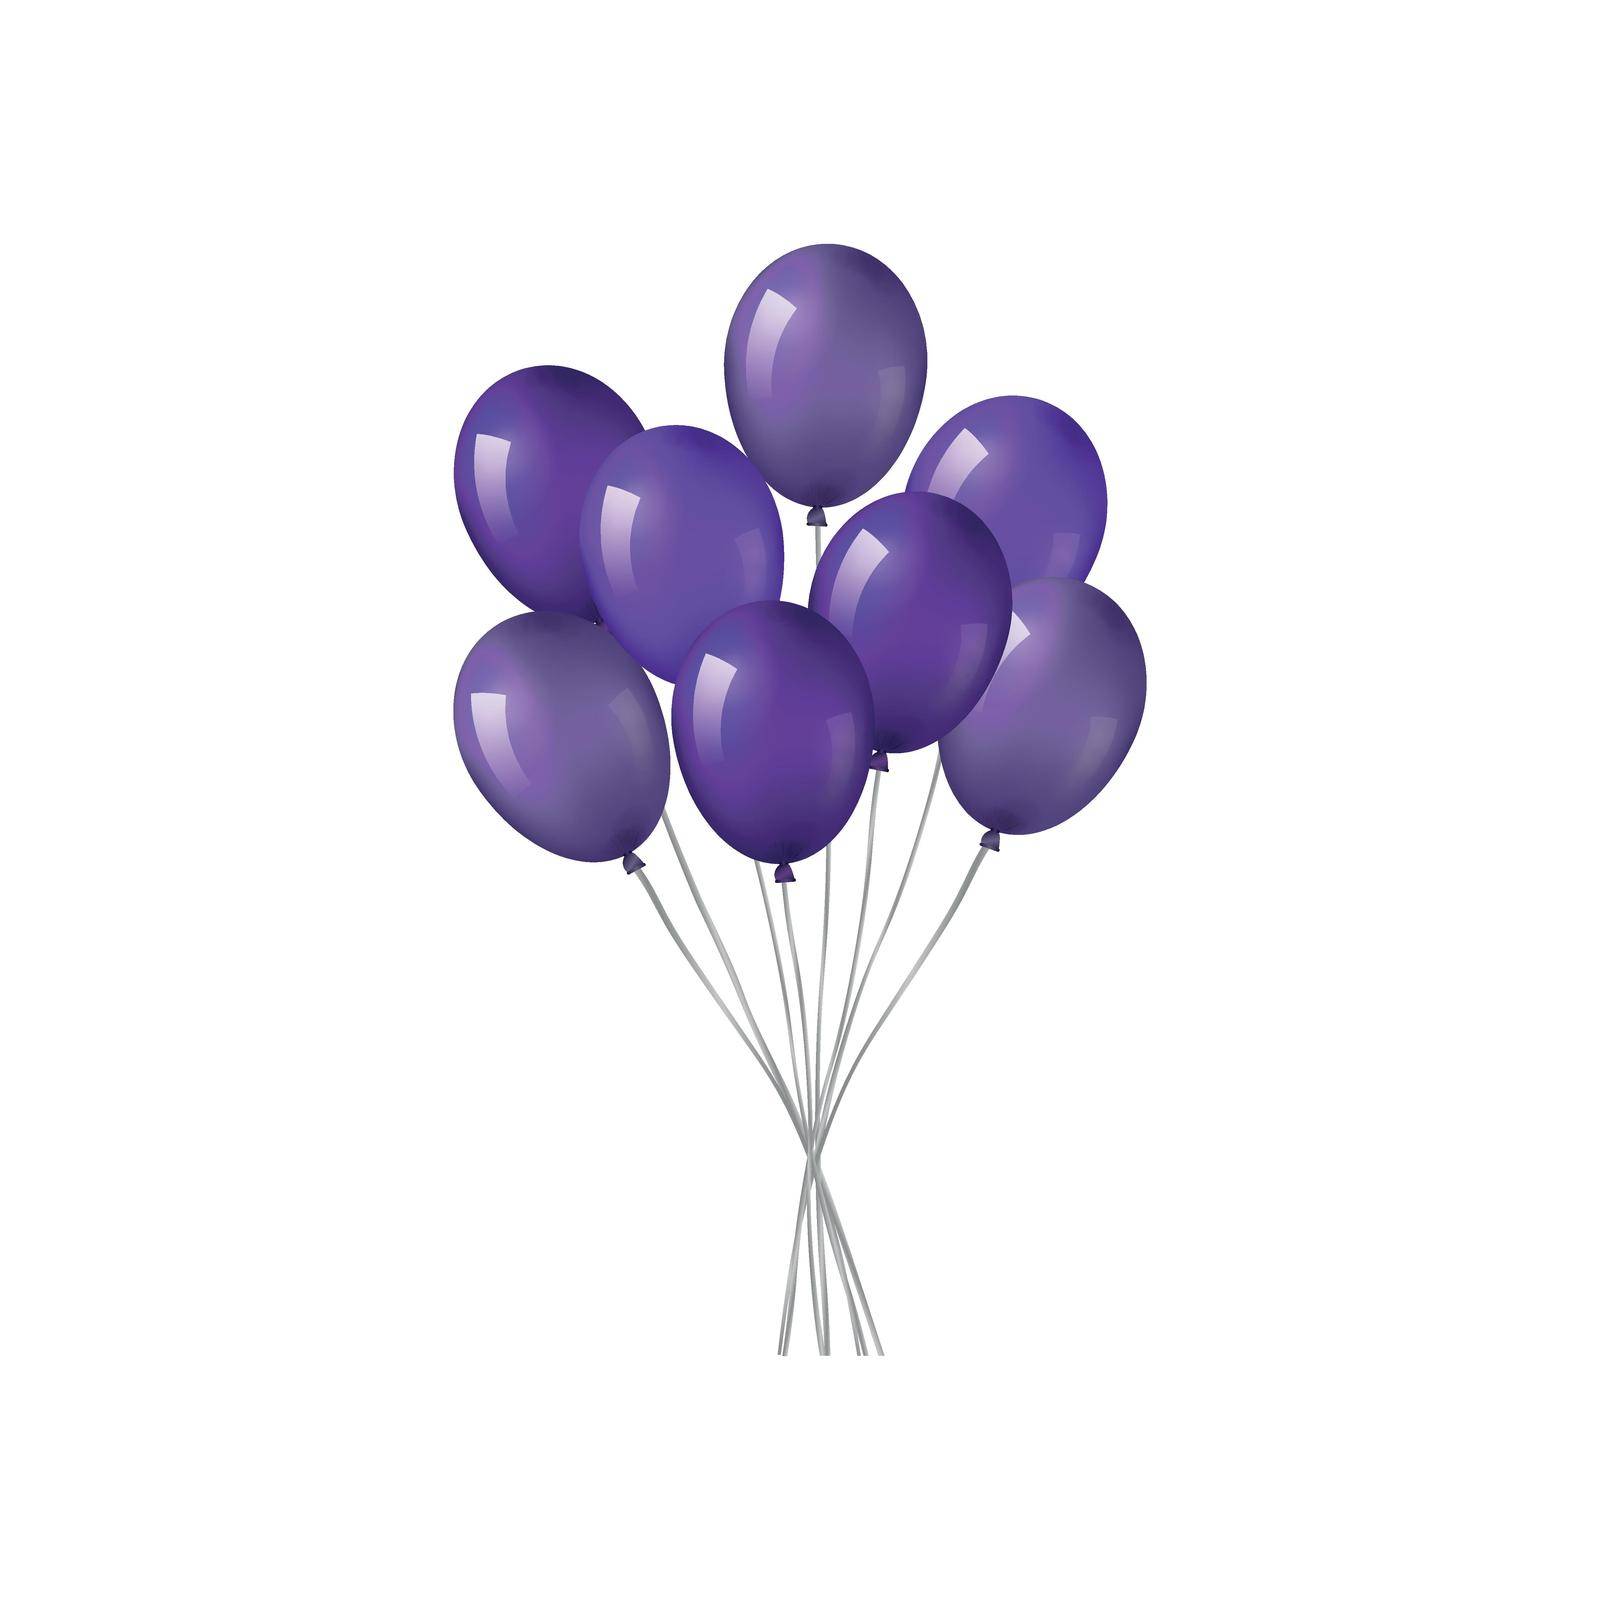 Bunch of violet helium balloons isolated on white background.